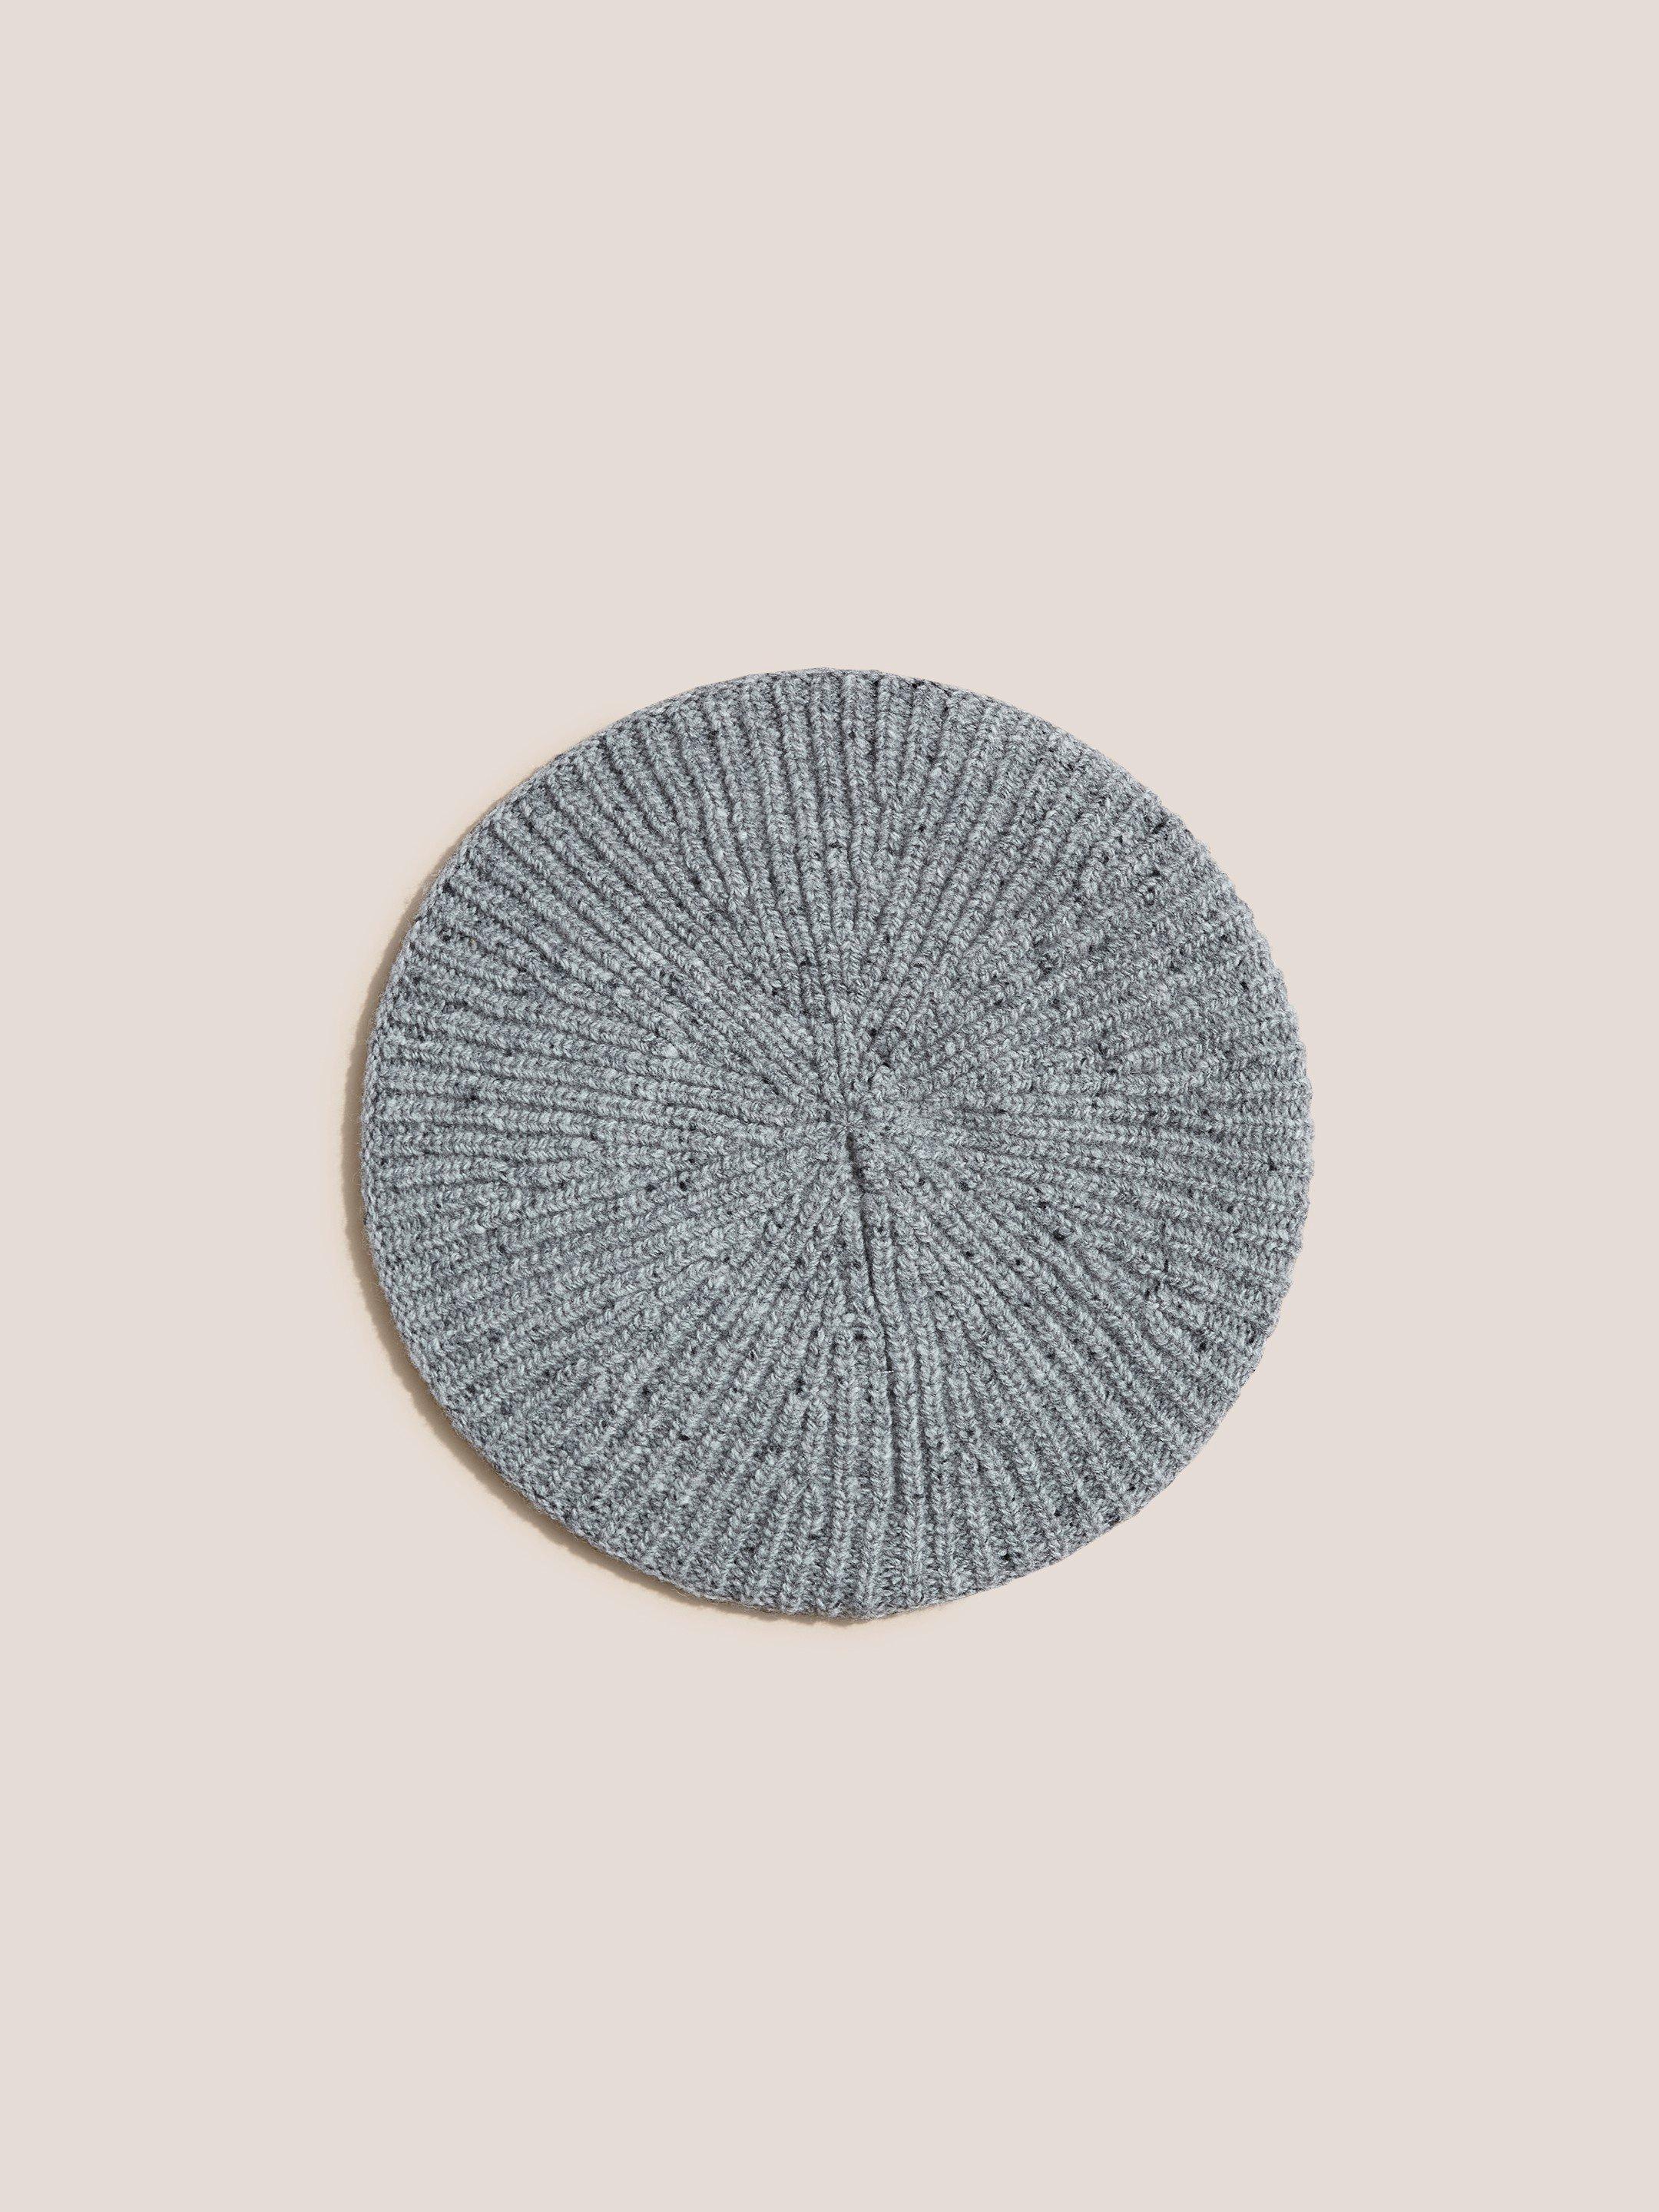 Neppy Beret in LGT GREY - FLAT FRONT